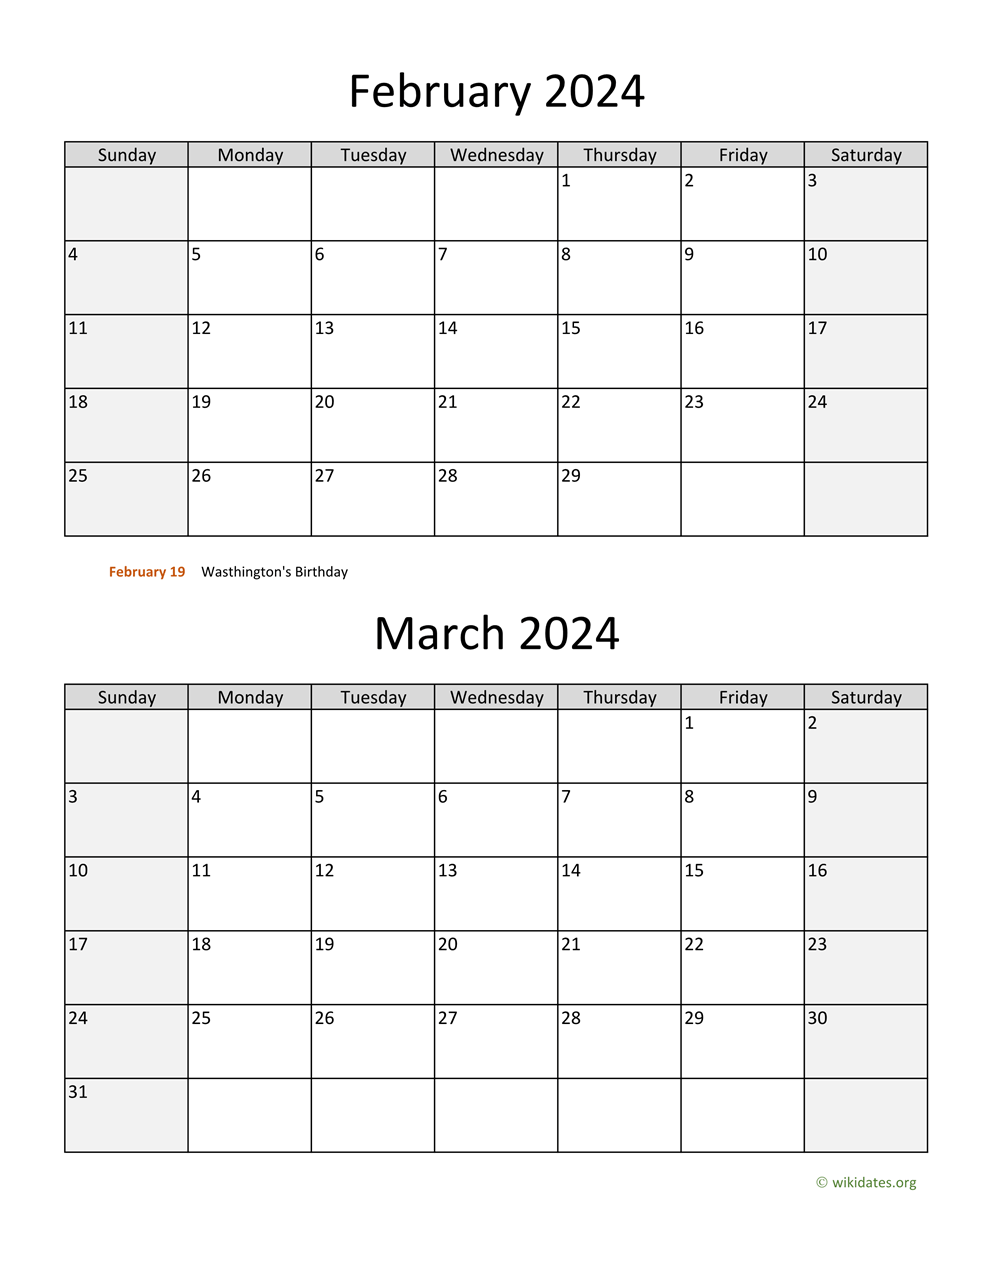 february-and-march-2024-calendar-wikidates